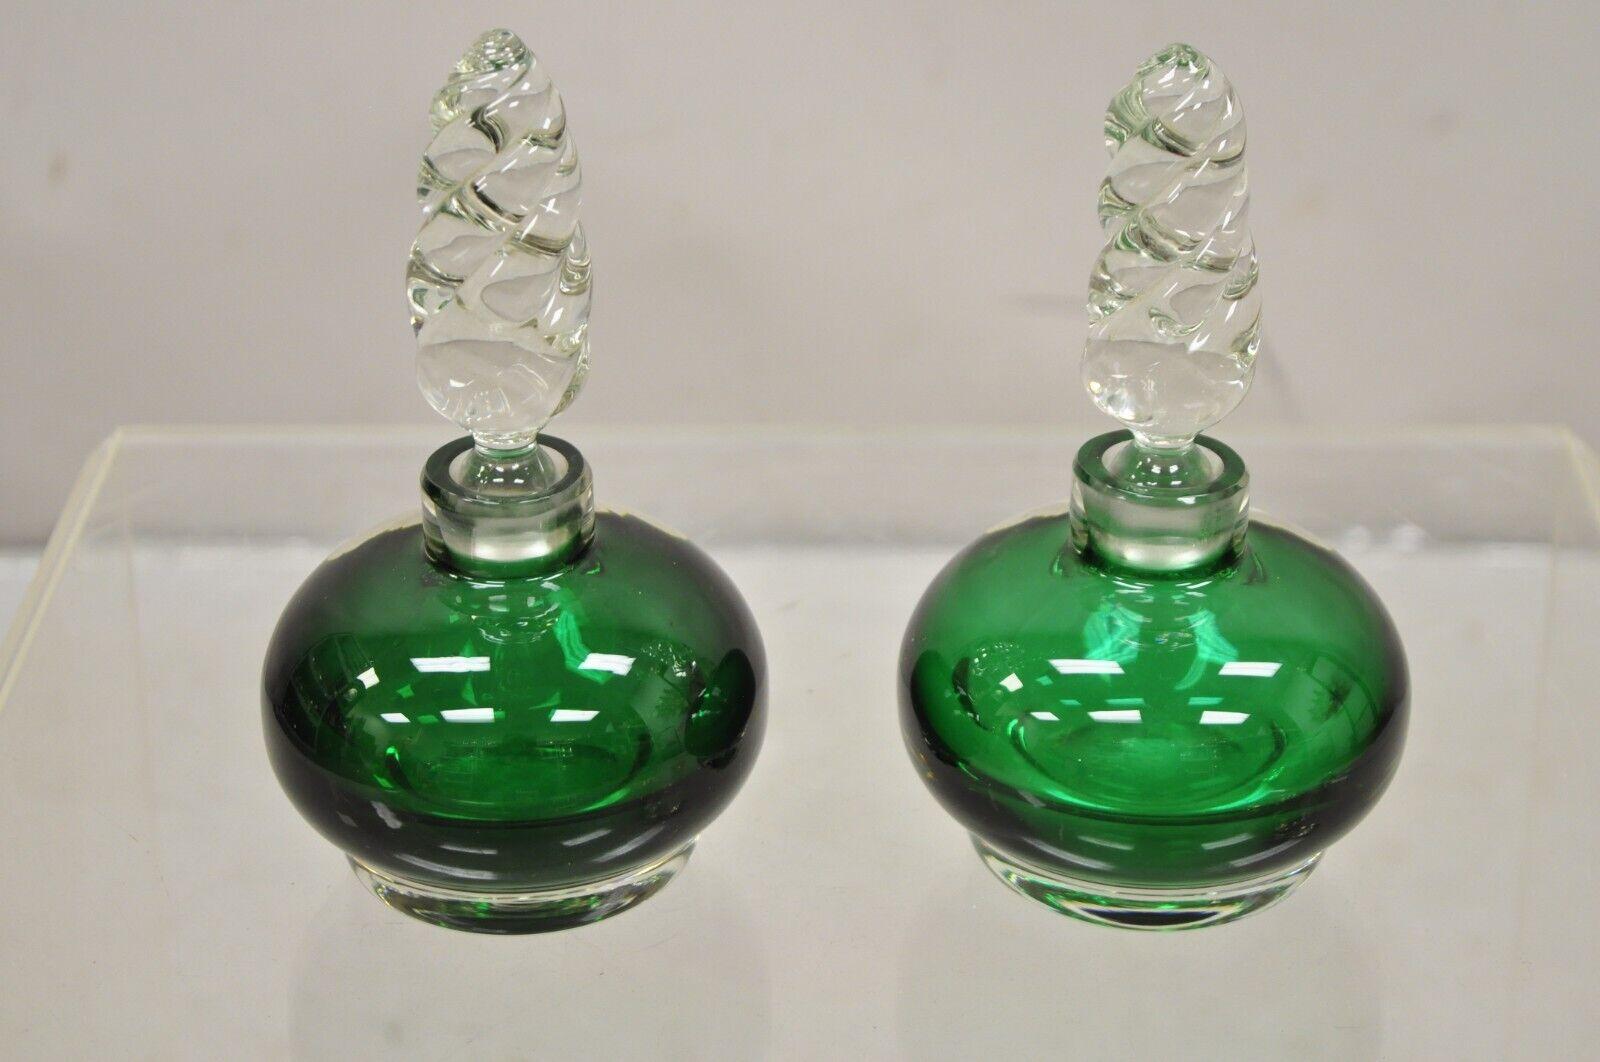 Large Vintage Emerald Green Blown Glass Spiral Stopper Bavarian Perfume Bottle - a Pair. Circa Mid 20th Century. Measurements: 7